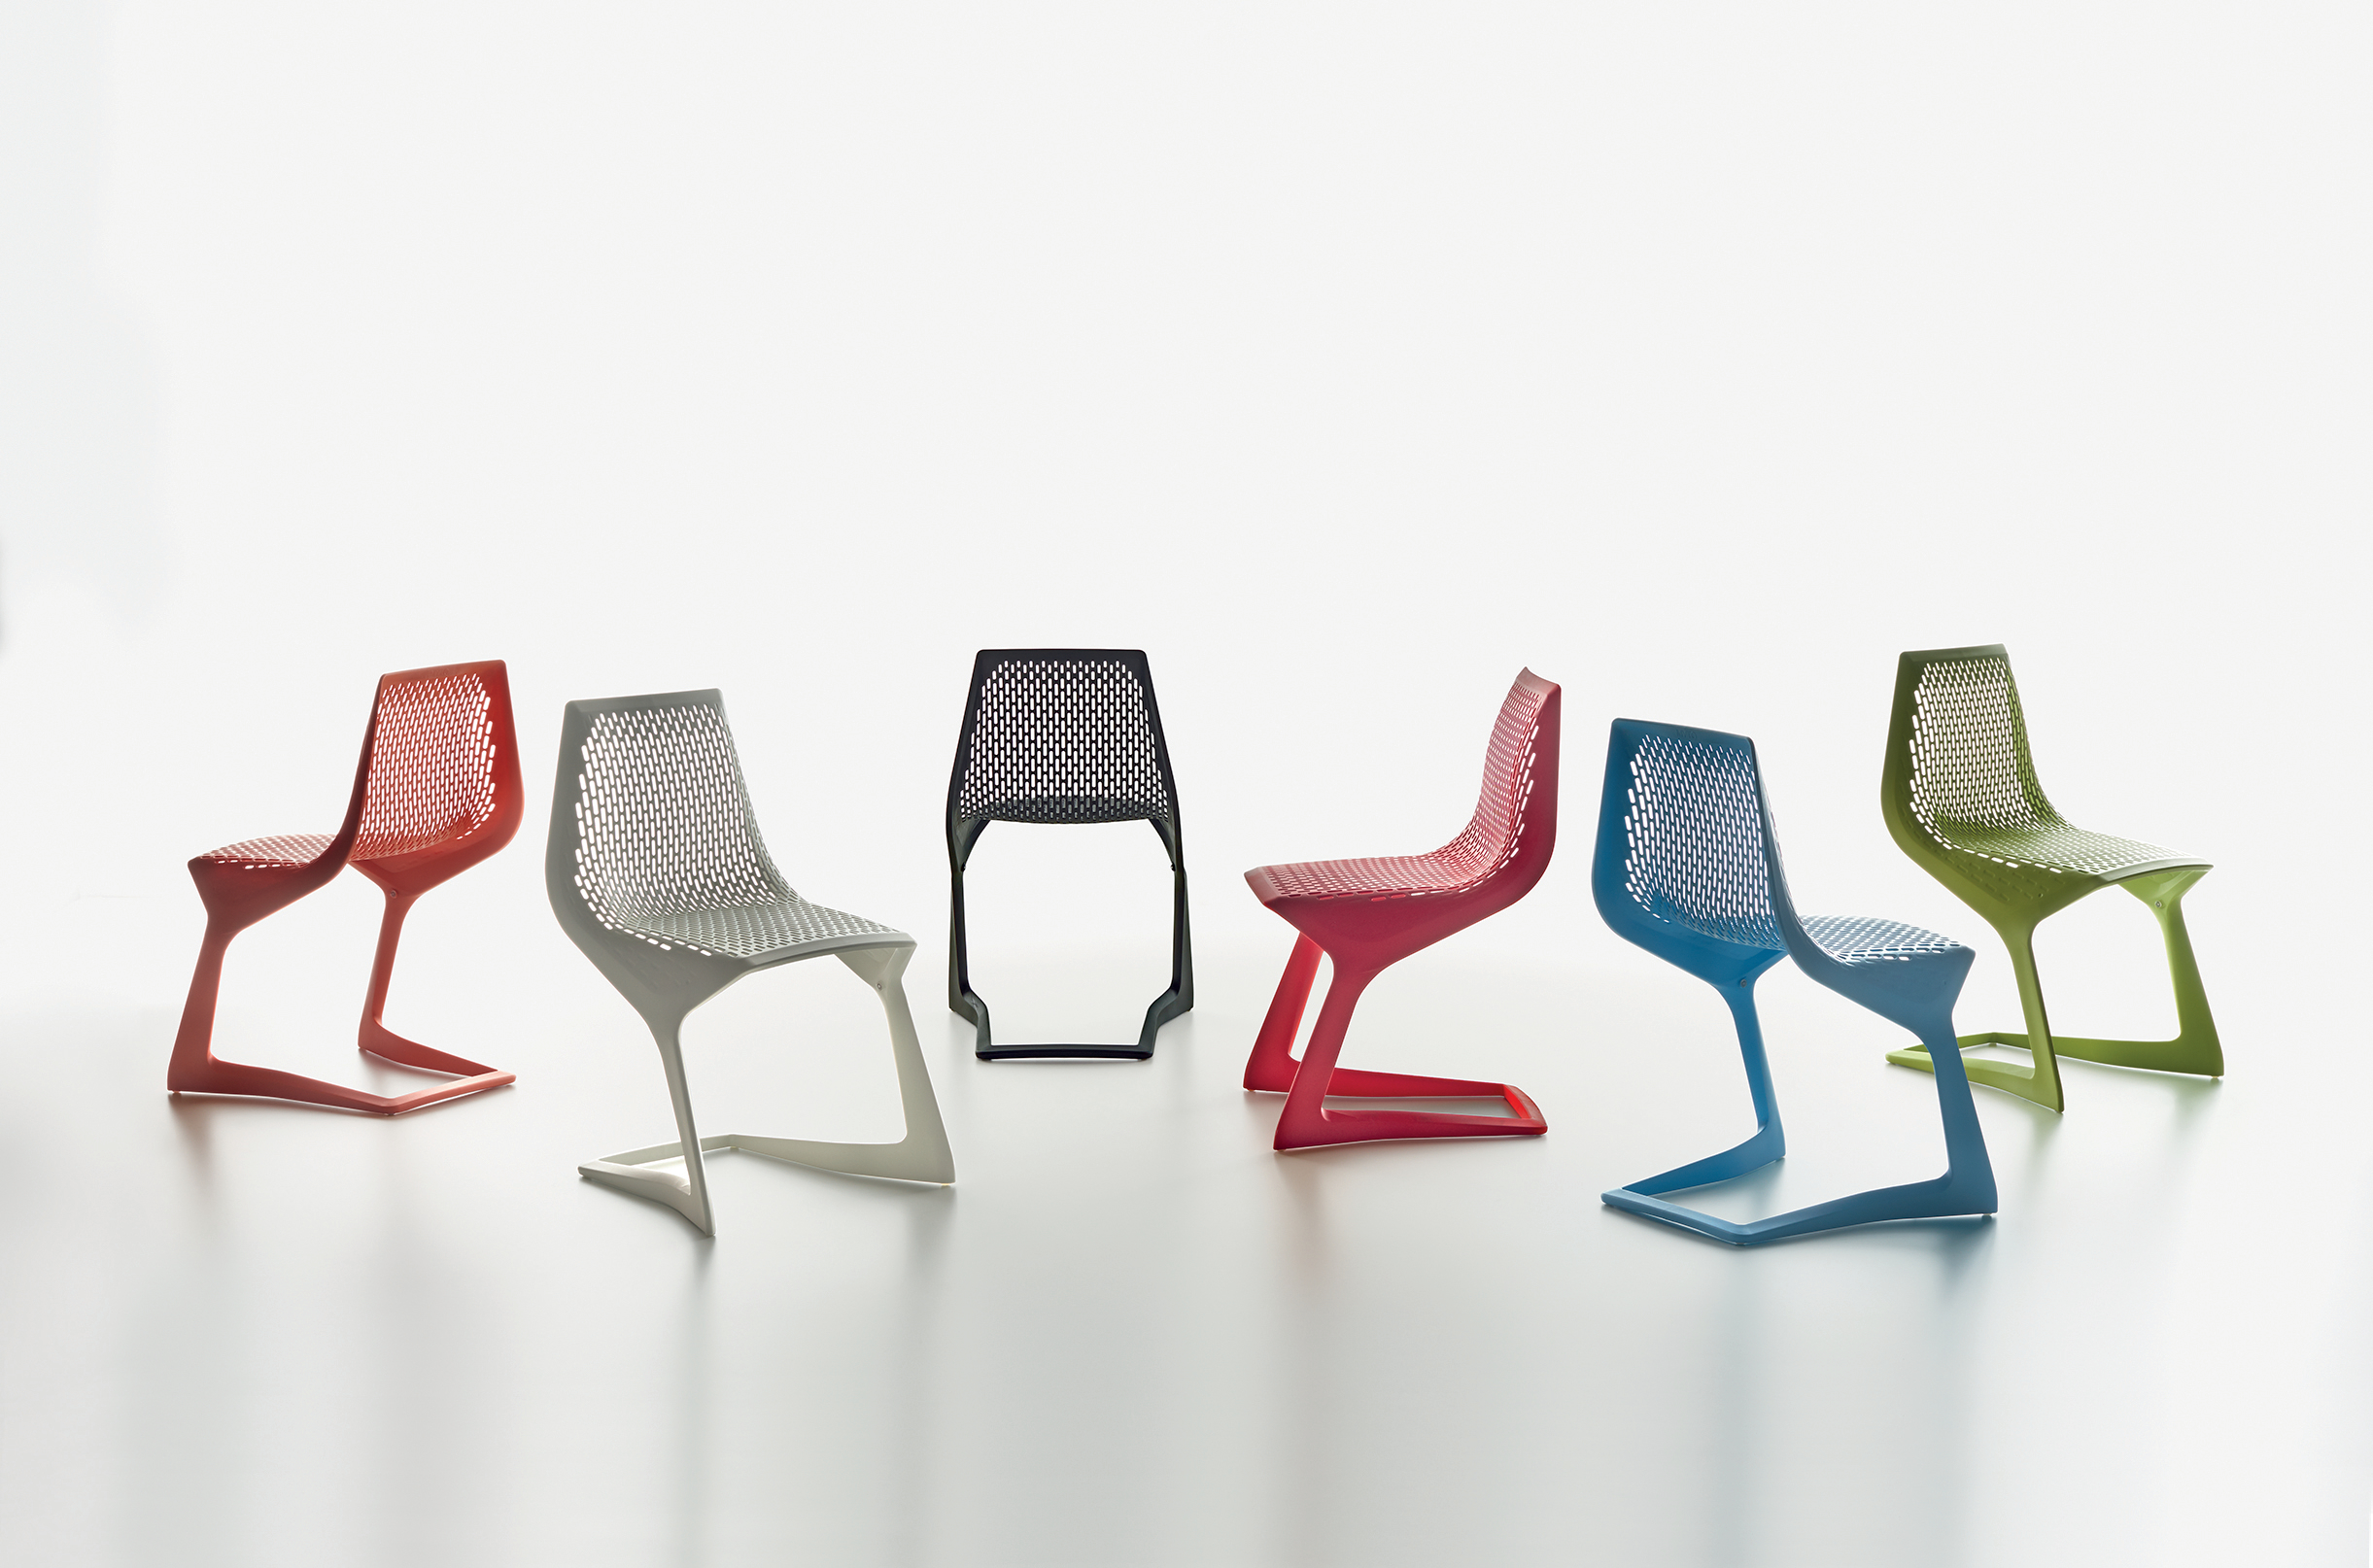 MYTO chair